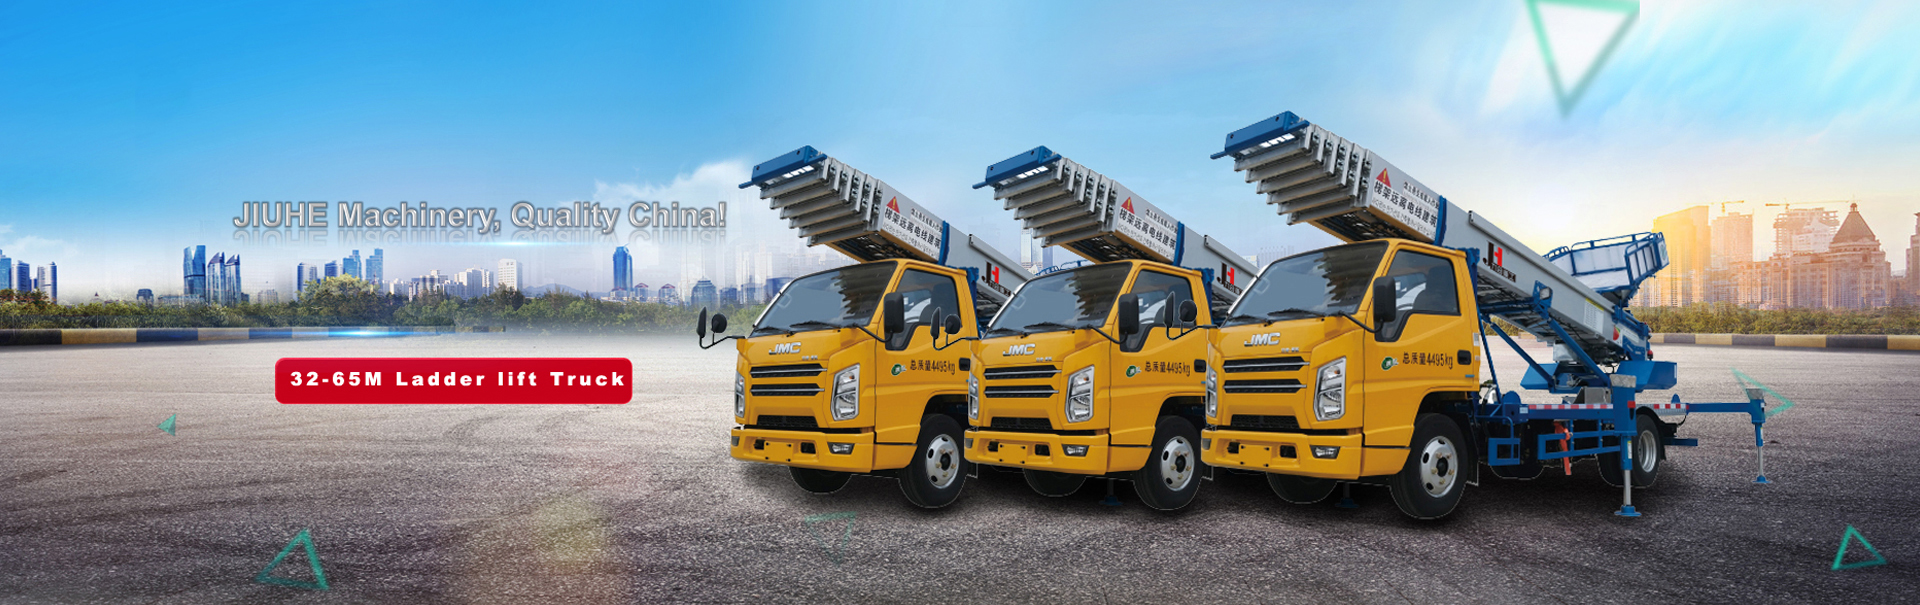 ladder lift truck, constructon material lifting truck, moving truck